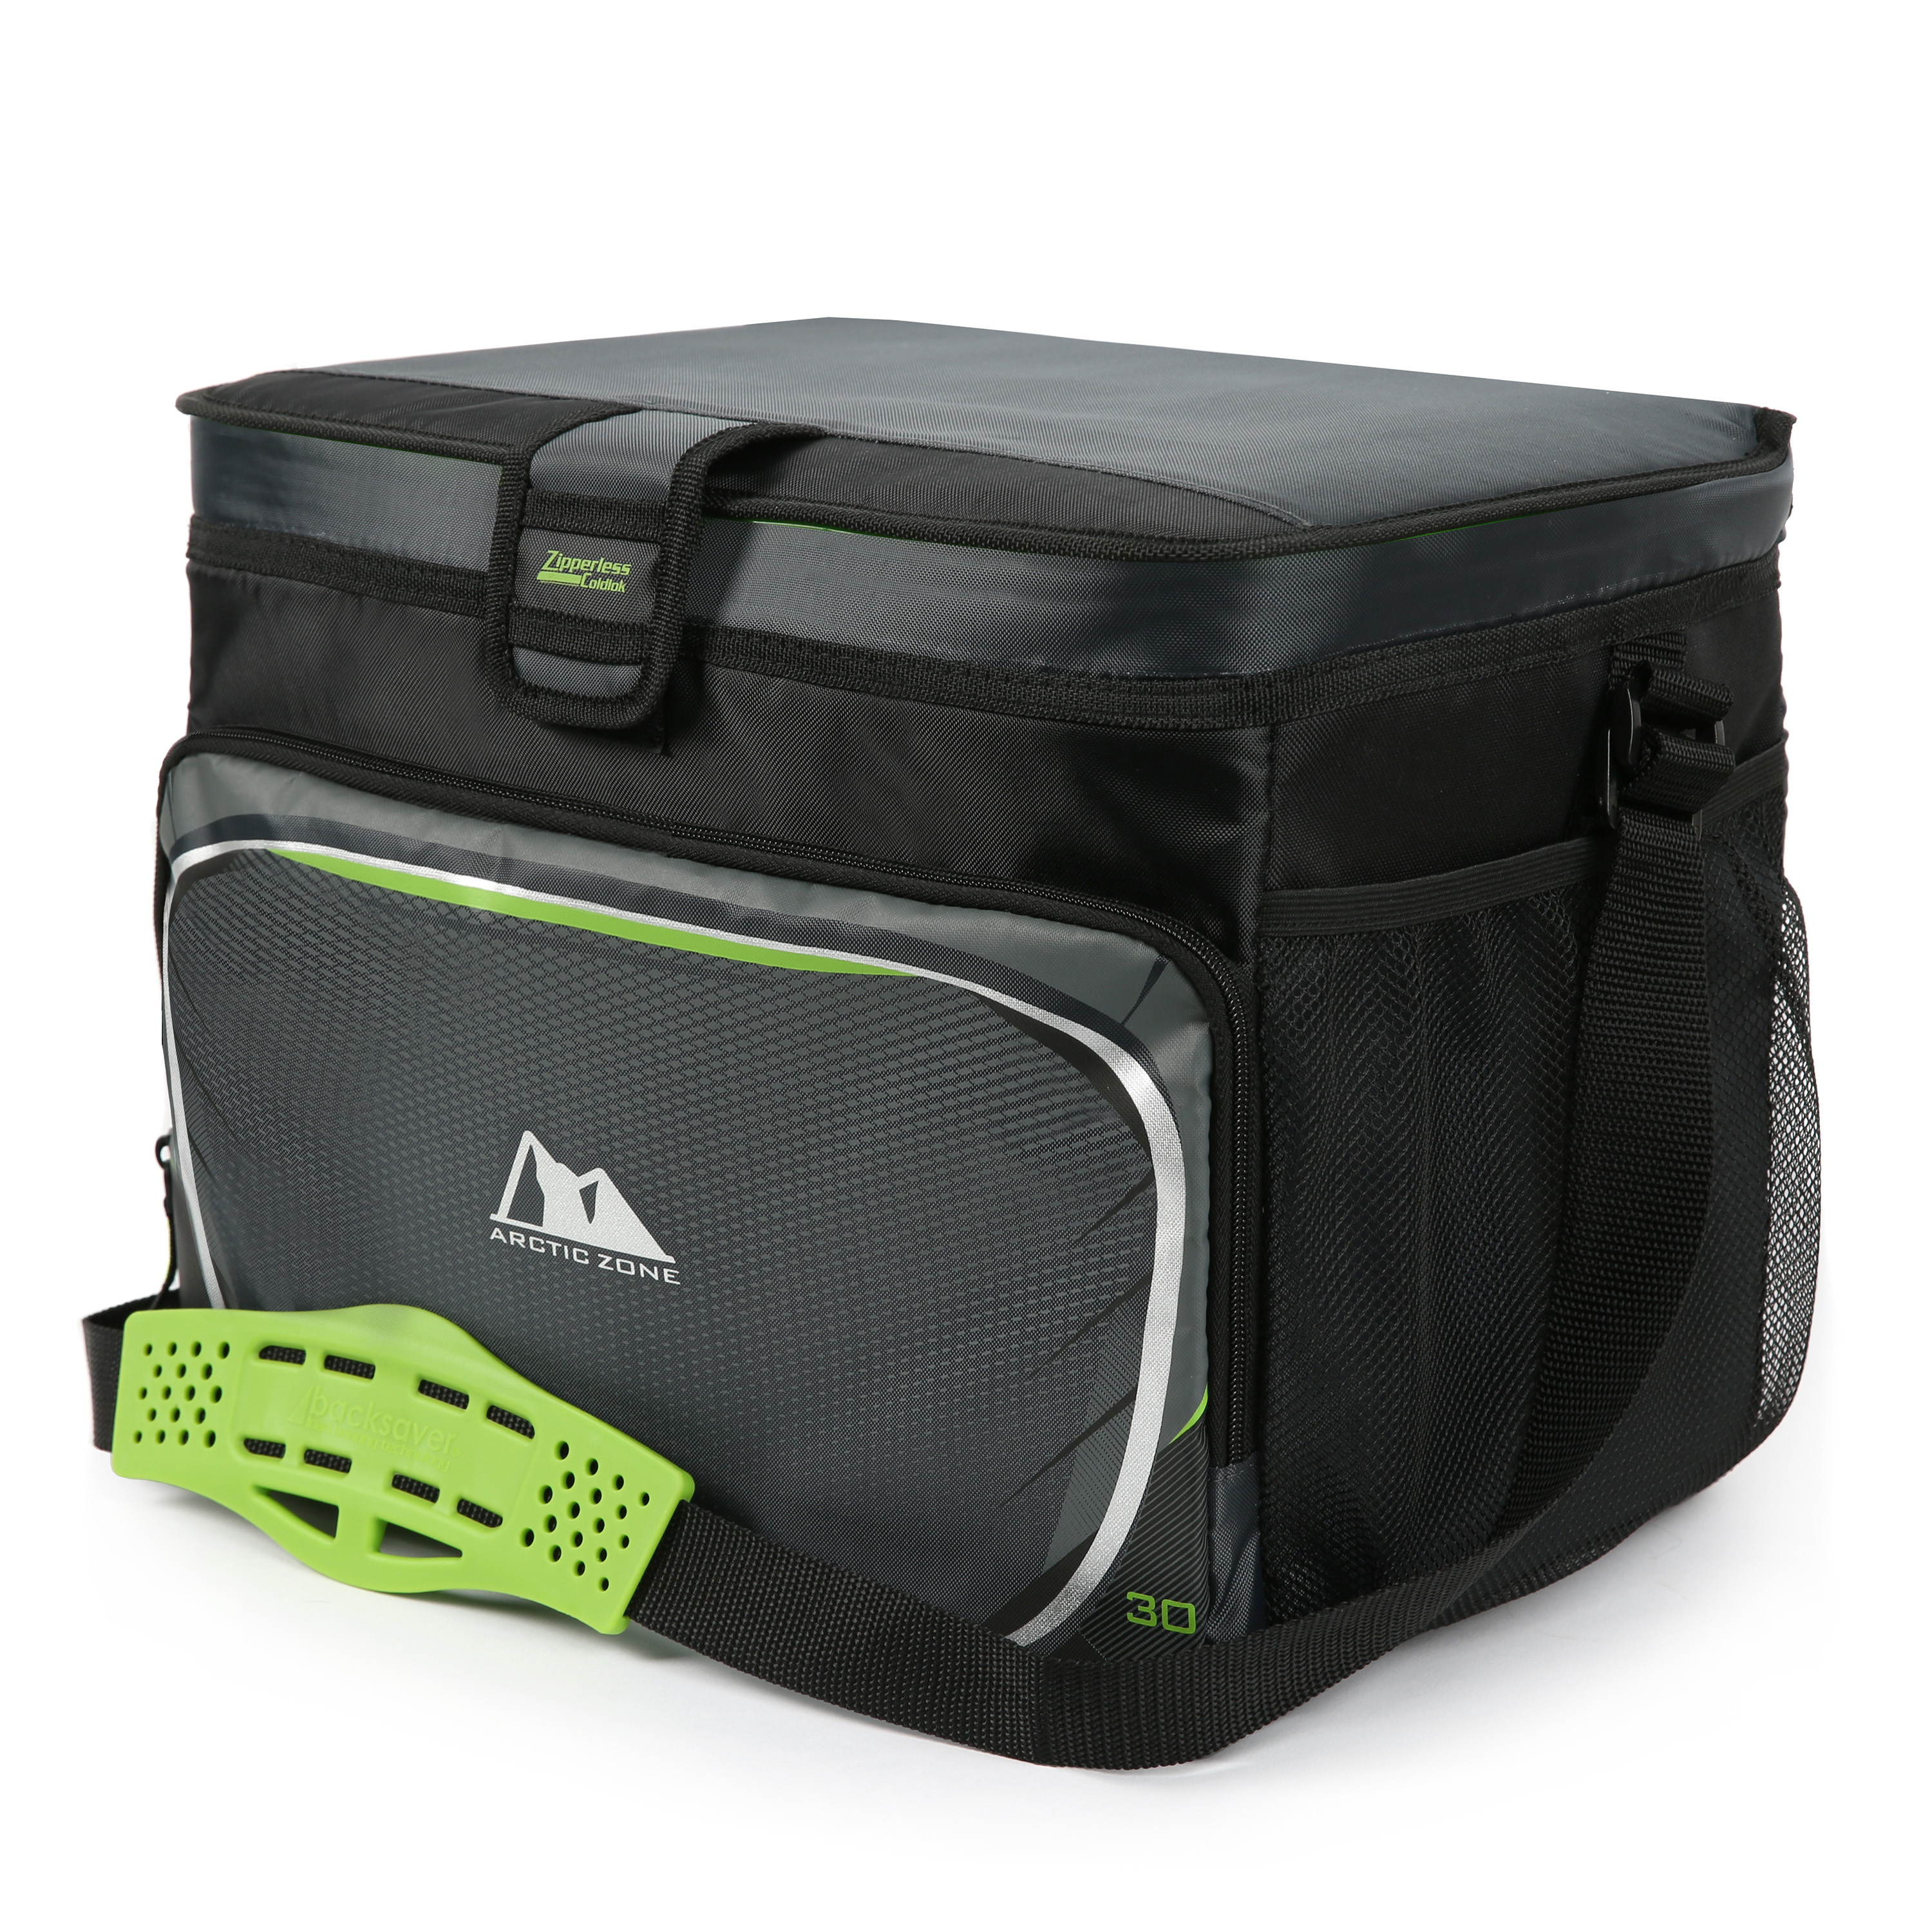 Arctic Zone 30 cans Zipperless Soft Sided Cooler with Hard Liner, Black and Green - image 1 of 11